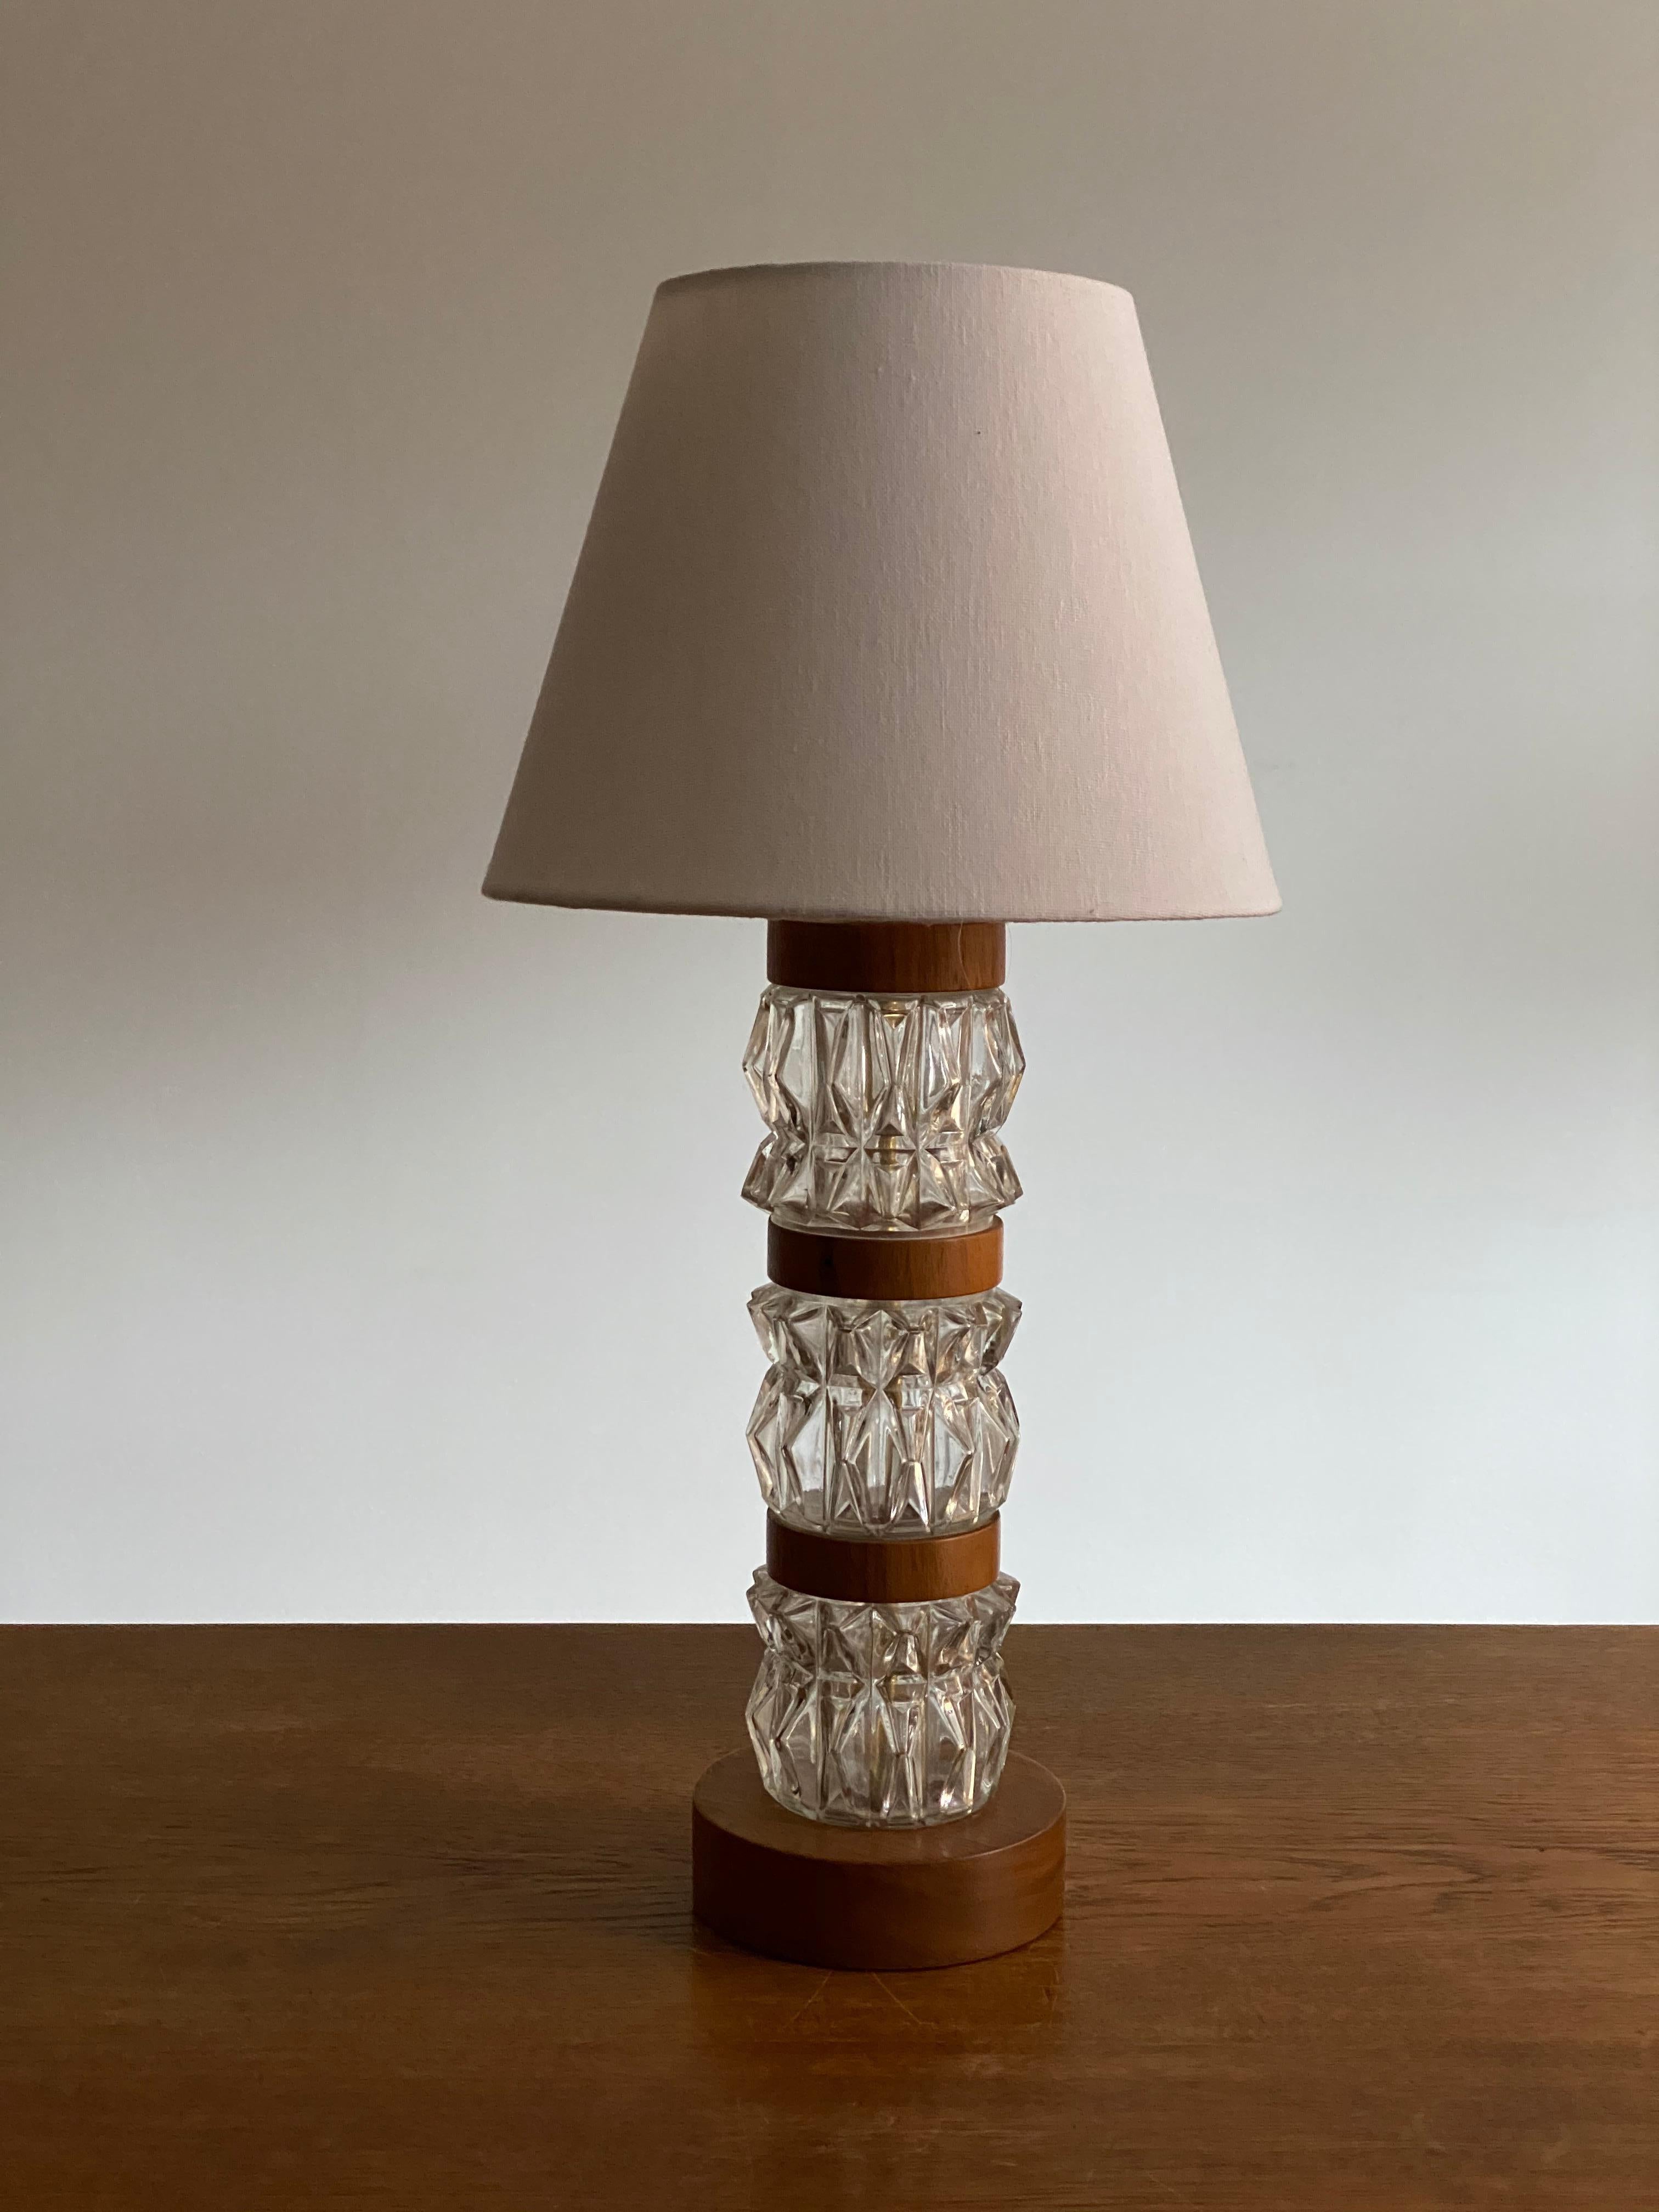 A highly modernist organic table lamp. Of Swedish production. In highly ornamented art glass, incorporates wooden ribbons in teak veneer.

The lampshade is not included in the purchase. Stated measurements are without a lampshade. Lampshade can be